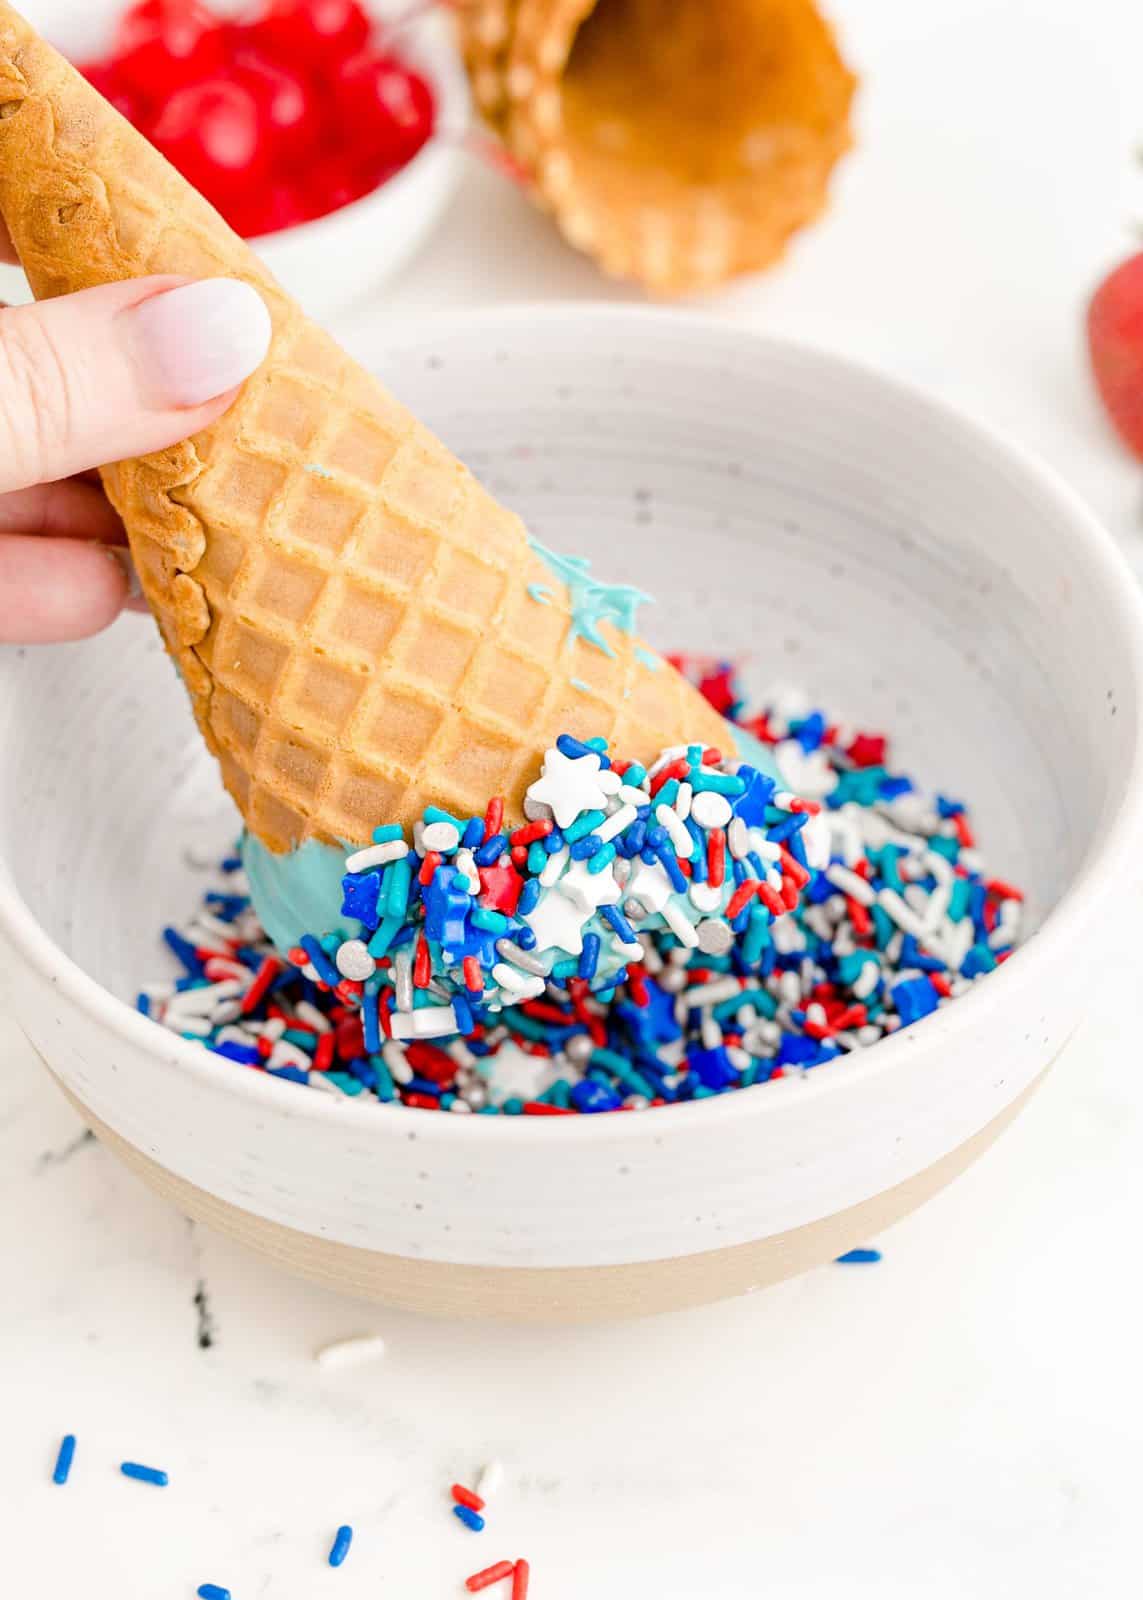 Waffle cone being dipped into sprinkles.